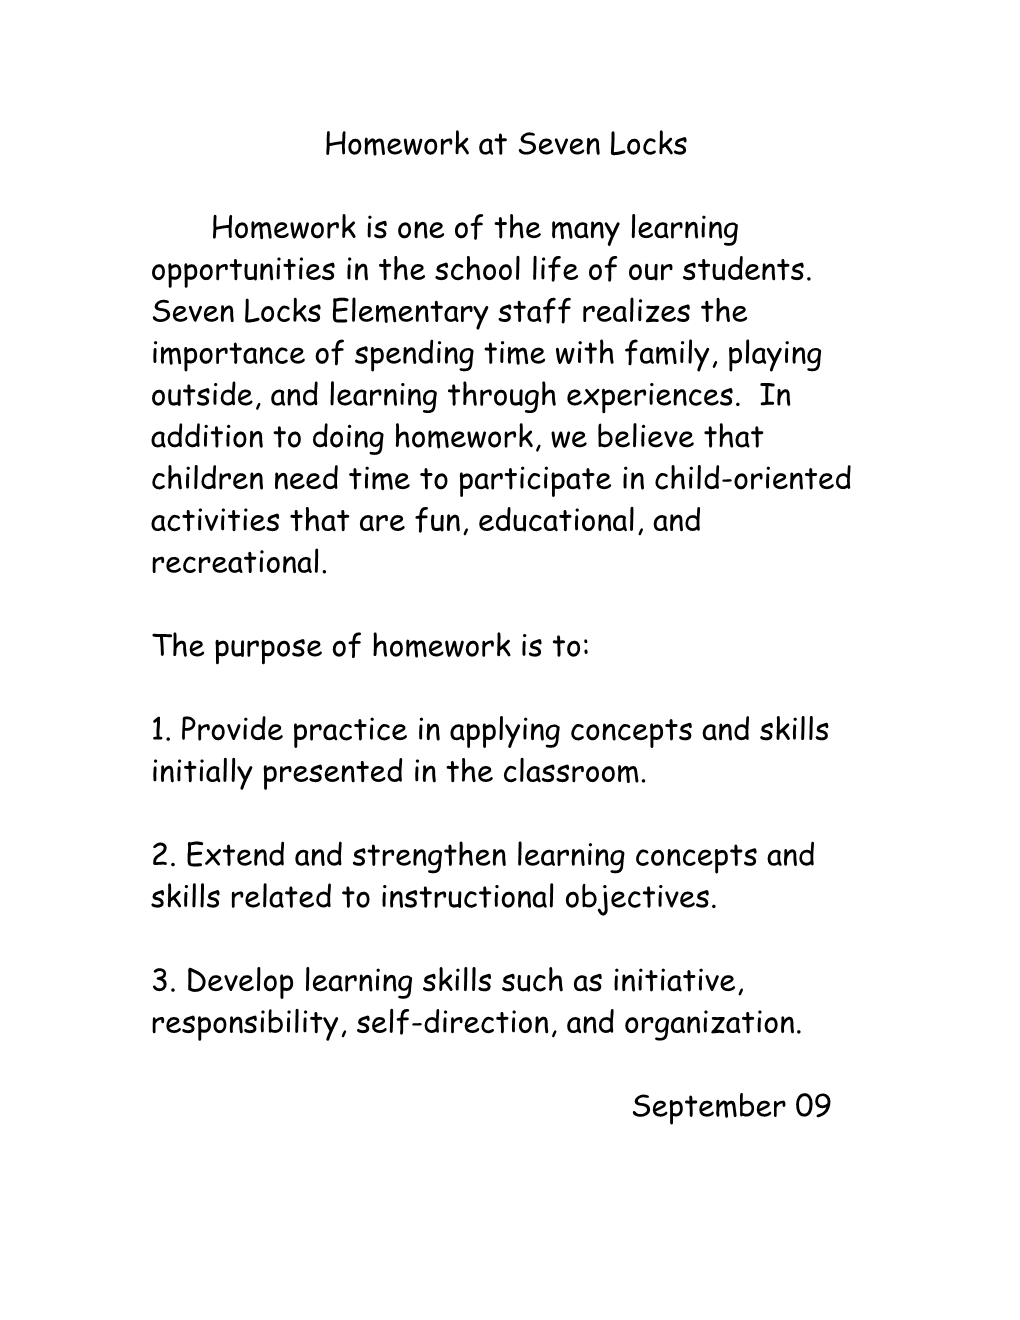 Homework Is One of the Many Learning Activities in the Total School Life of Our Students